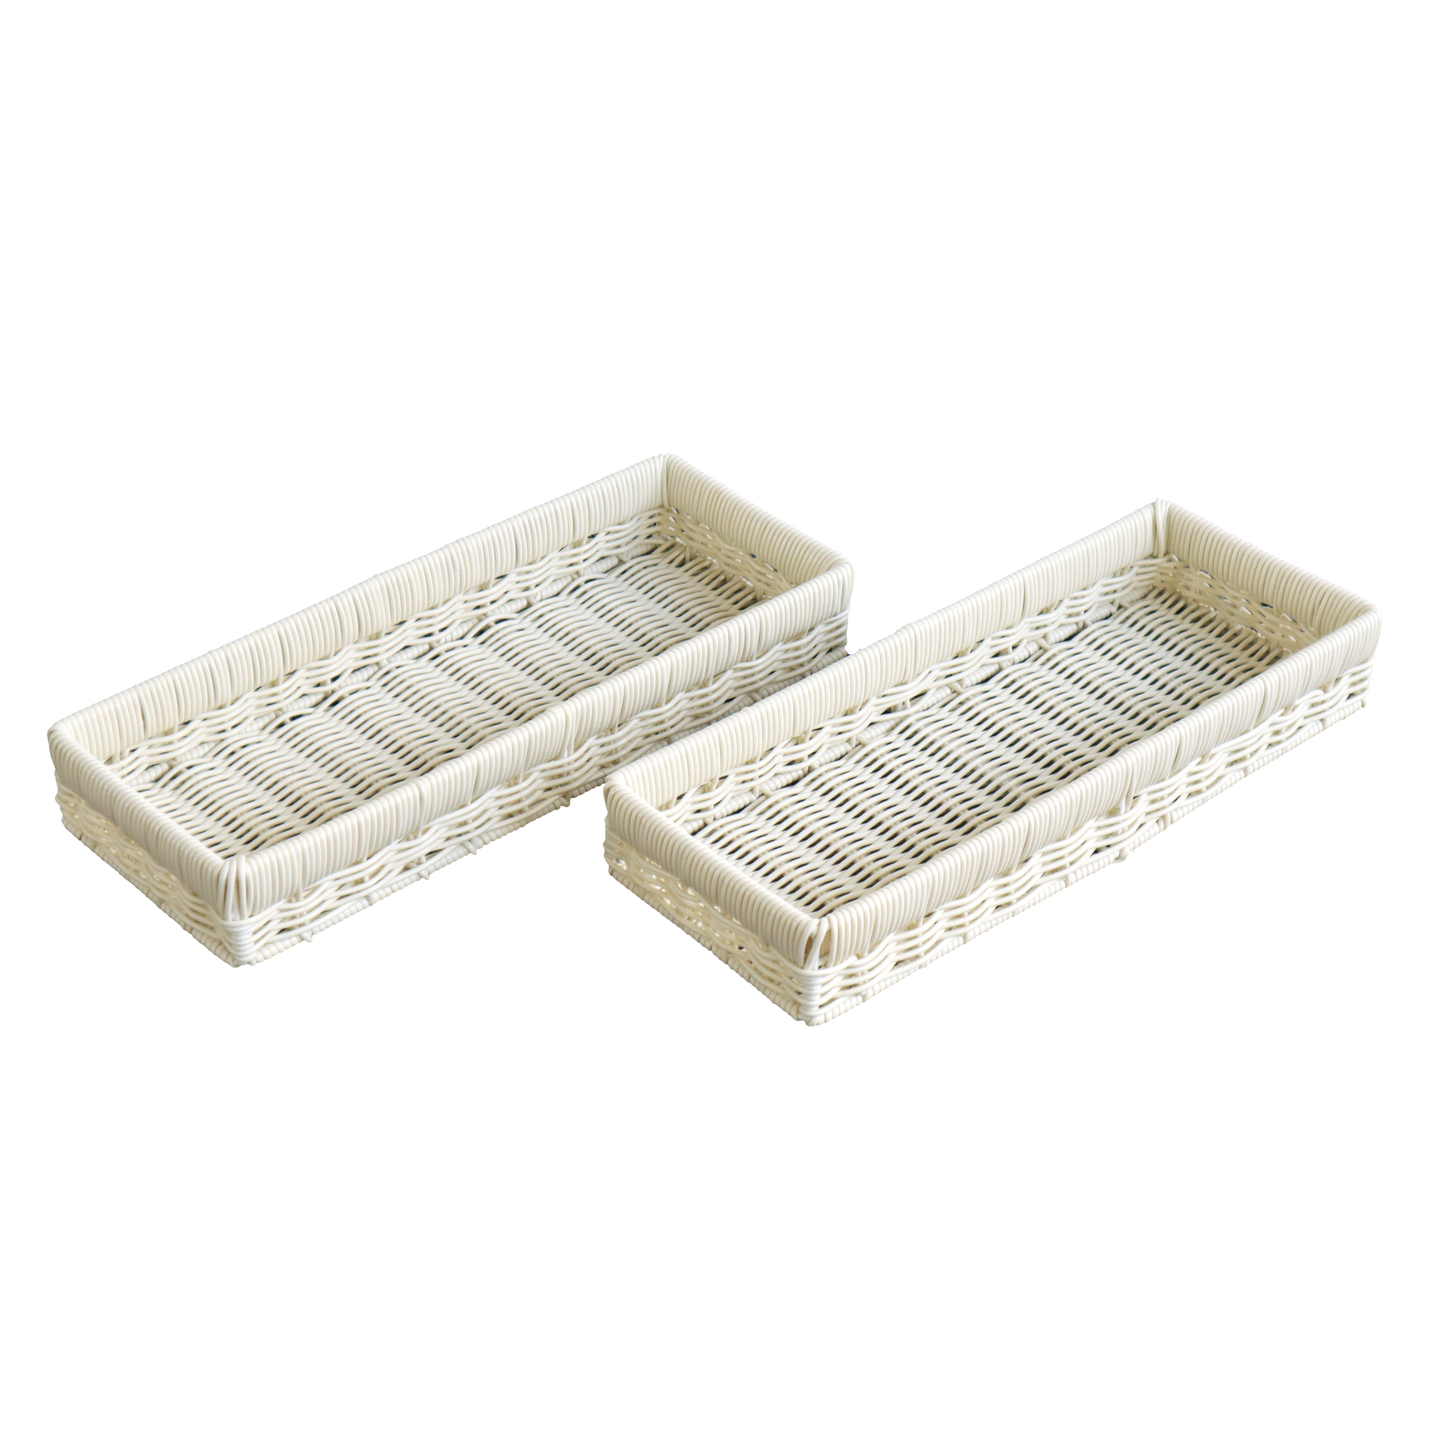 Eden Grace Set of 2 Hand Woven Wicker Serving Trays , Elegant Multi-Purpose Decorative Serving Trays in White and Gray